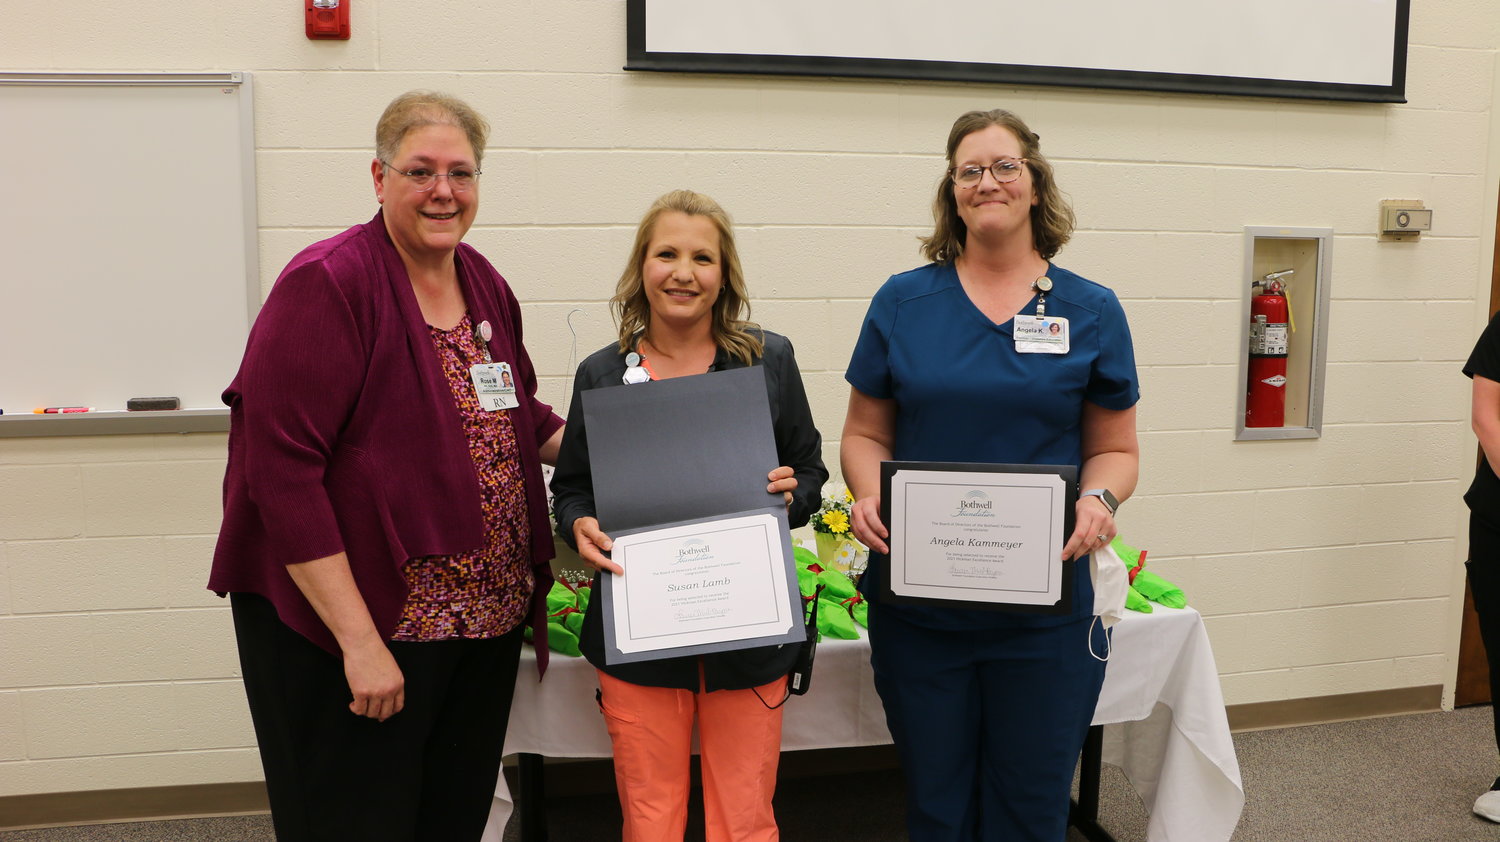 From left, Bothwell Chief Nursing Officer Rose McMullin with Hickman Excellence Scholarship winners Susan Lamb and Angela Kammeyer.